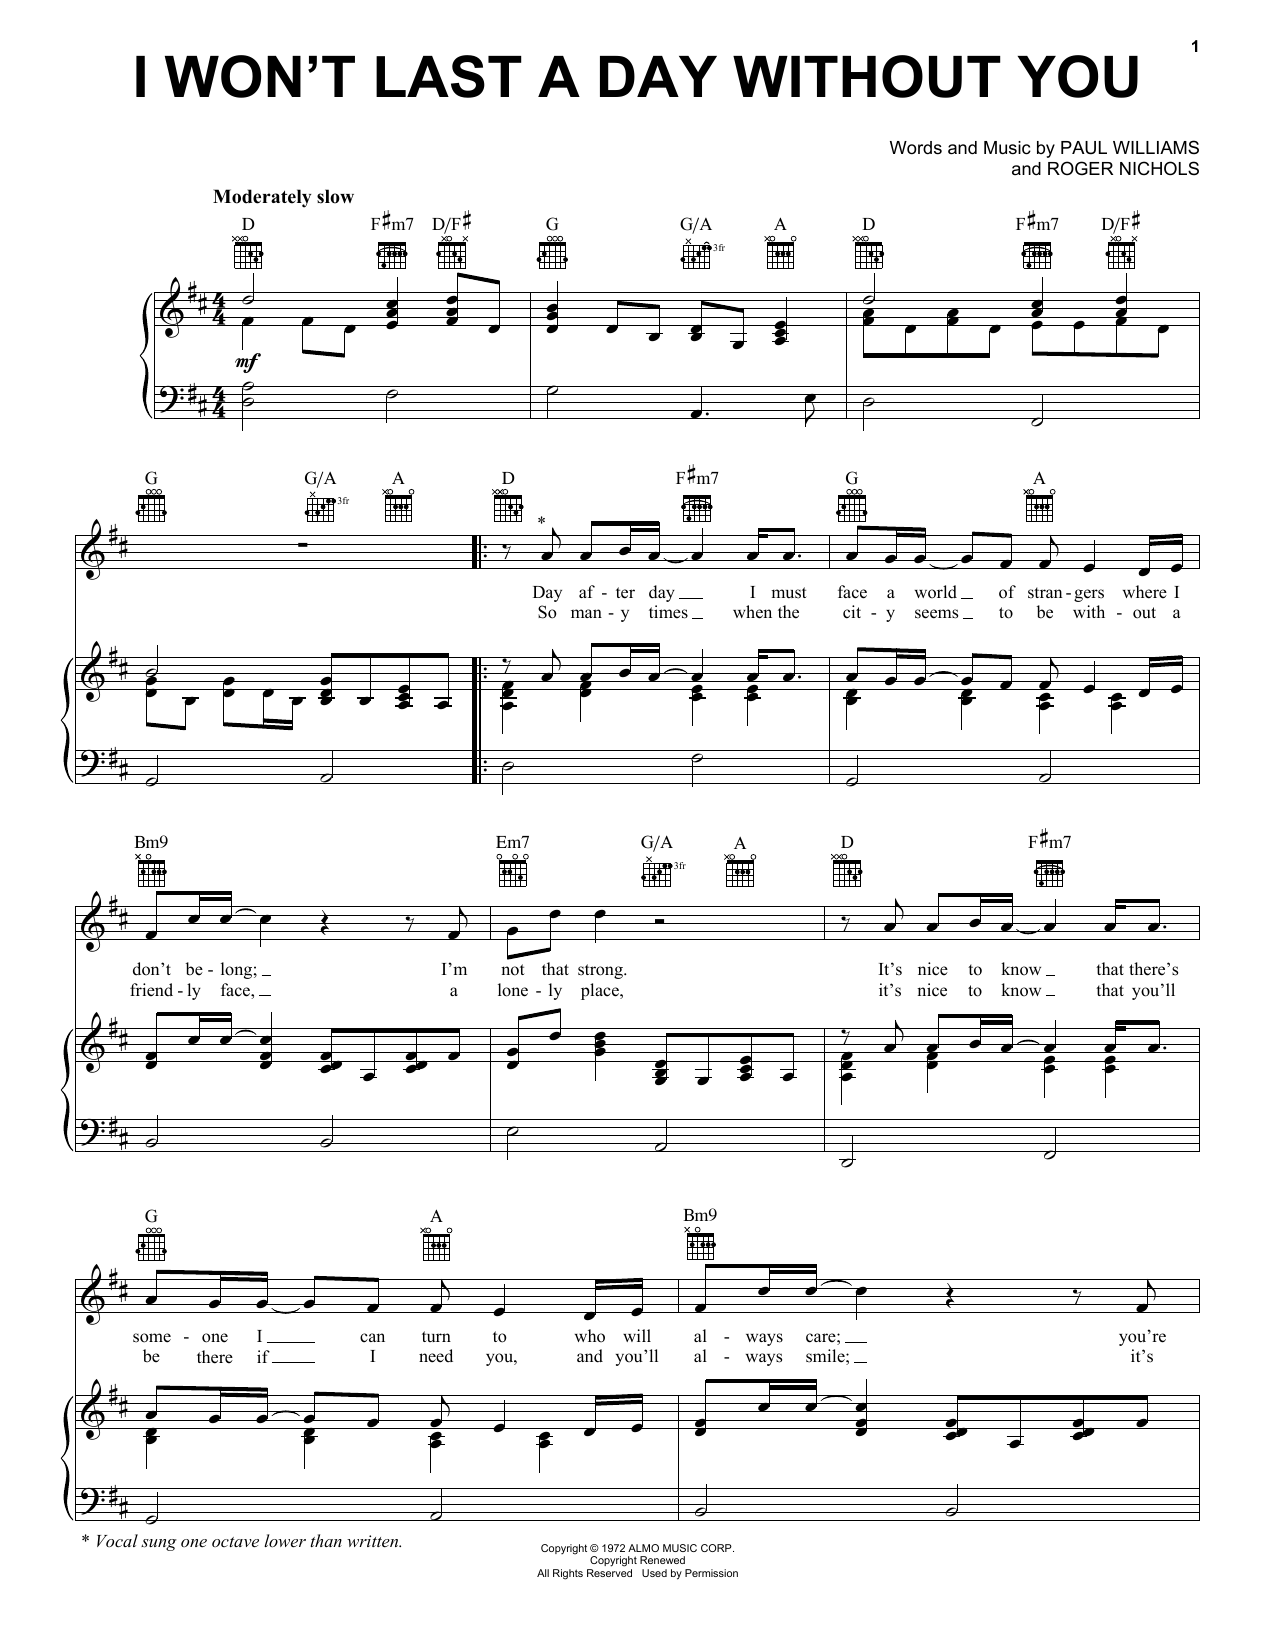 Carpenters I Won't Last A Day Without You sheet music notes and chords. Download Printable PDF.